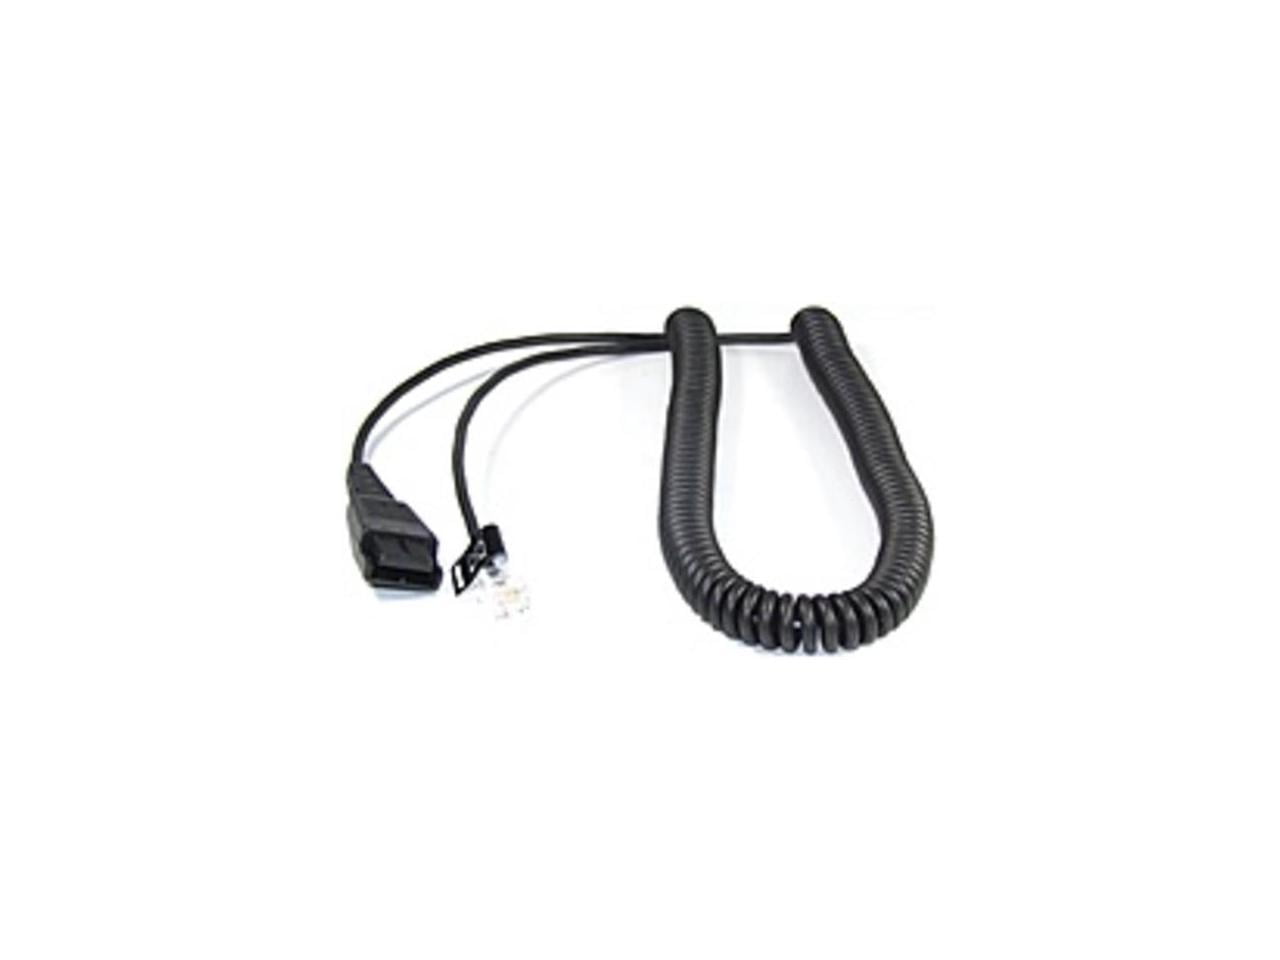 2 METER 8800-01-37 NEW JABRA QUICK DISCONNECT TO MODULAR COILED BOTTOM CORD 